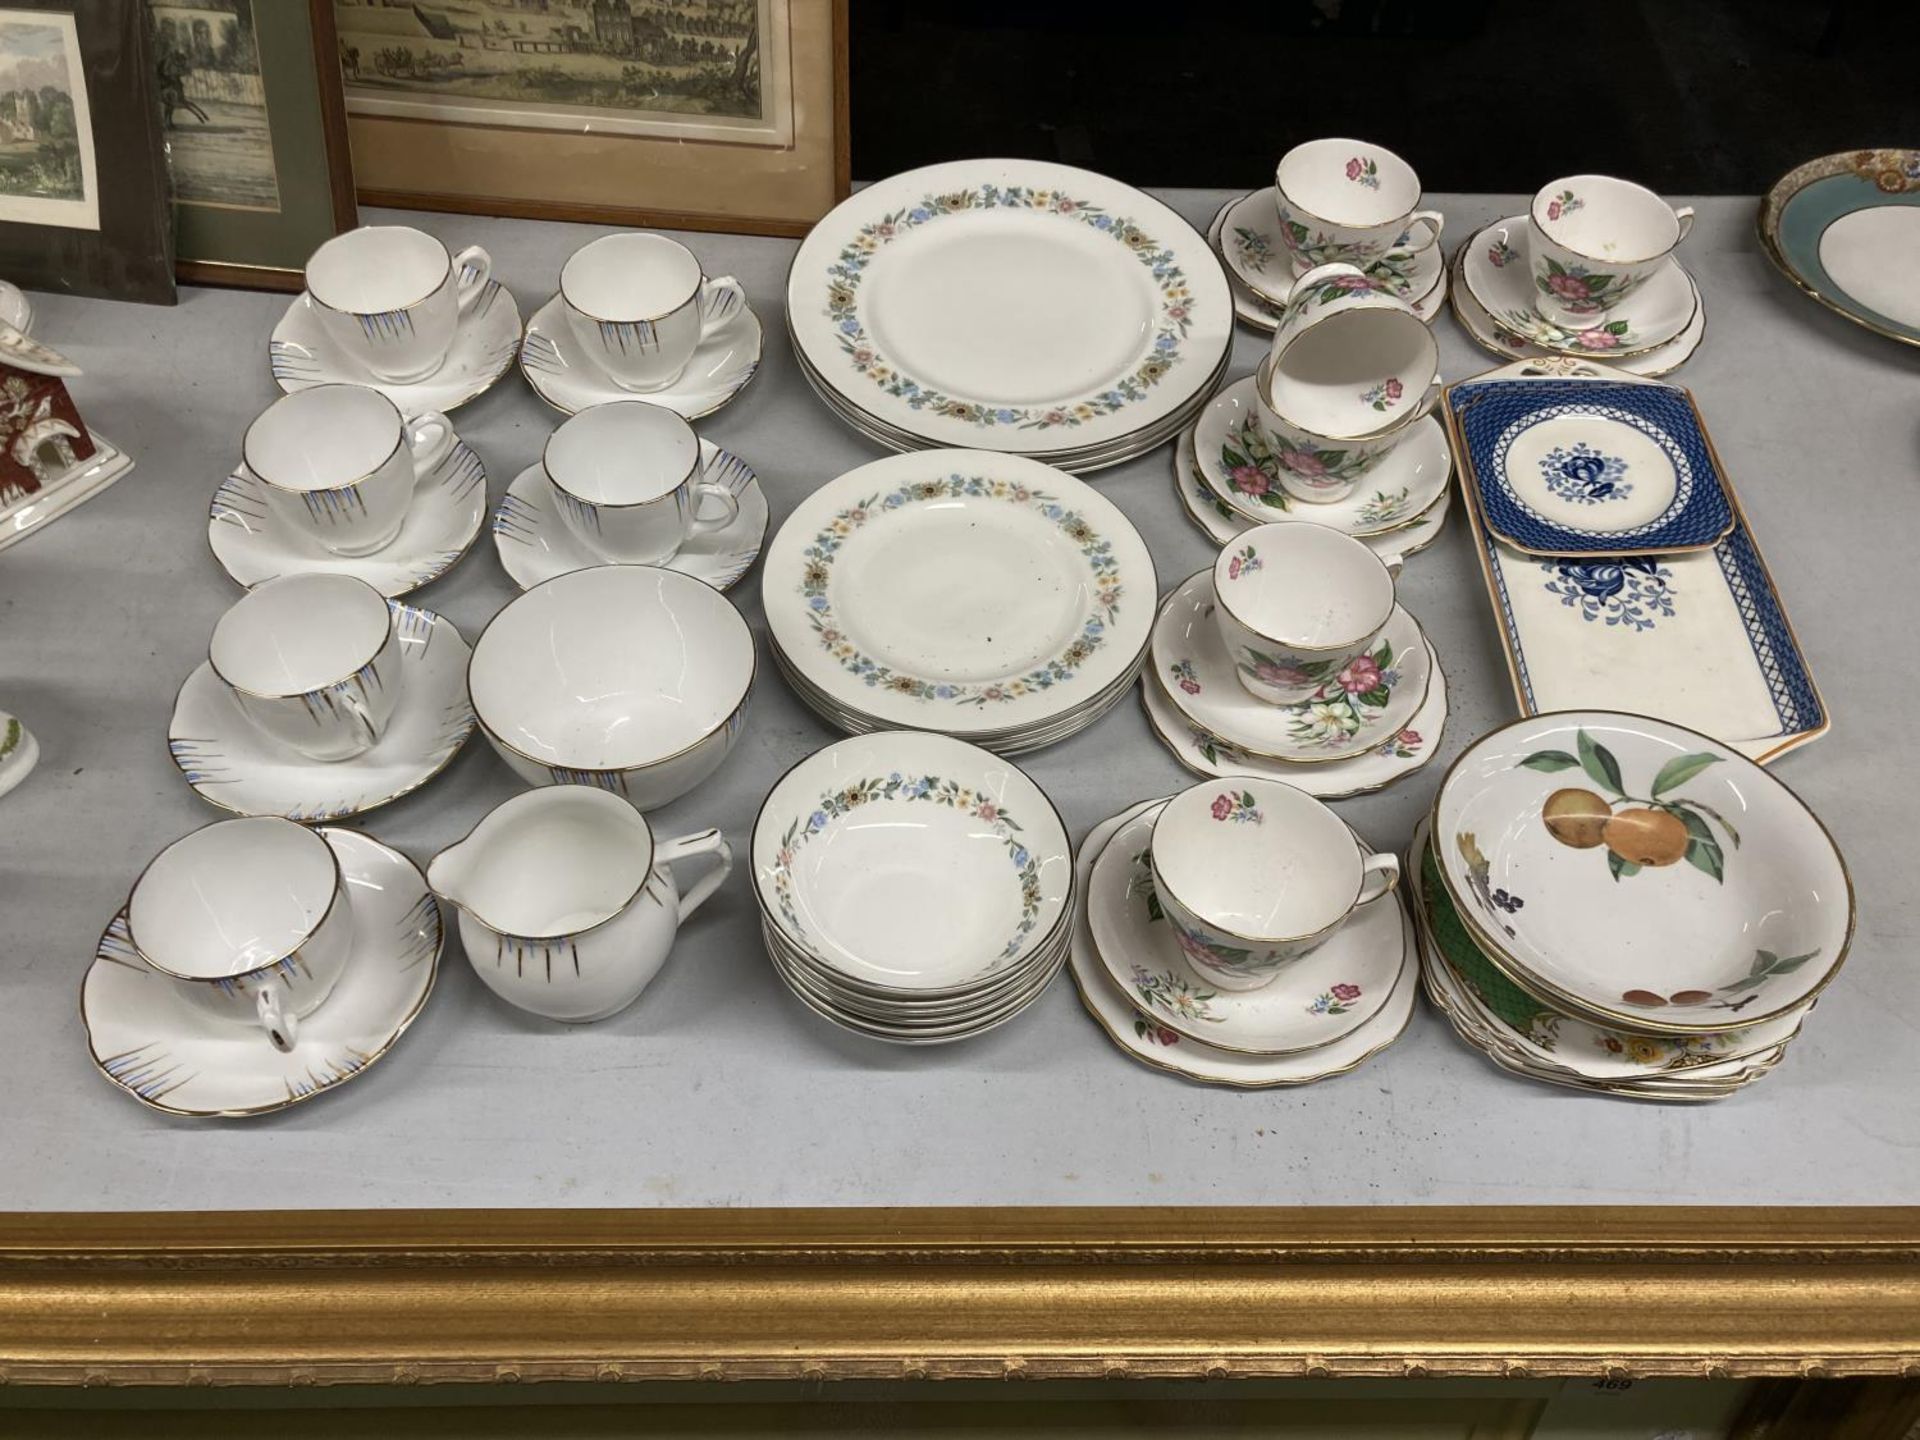 A QUANTITY OF CHINA TEACUPS, SAUCERS, PLATES, ETC TO INCLUDE ROYALE DOULTON 'PASTORALE', CROWN